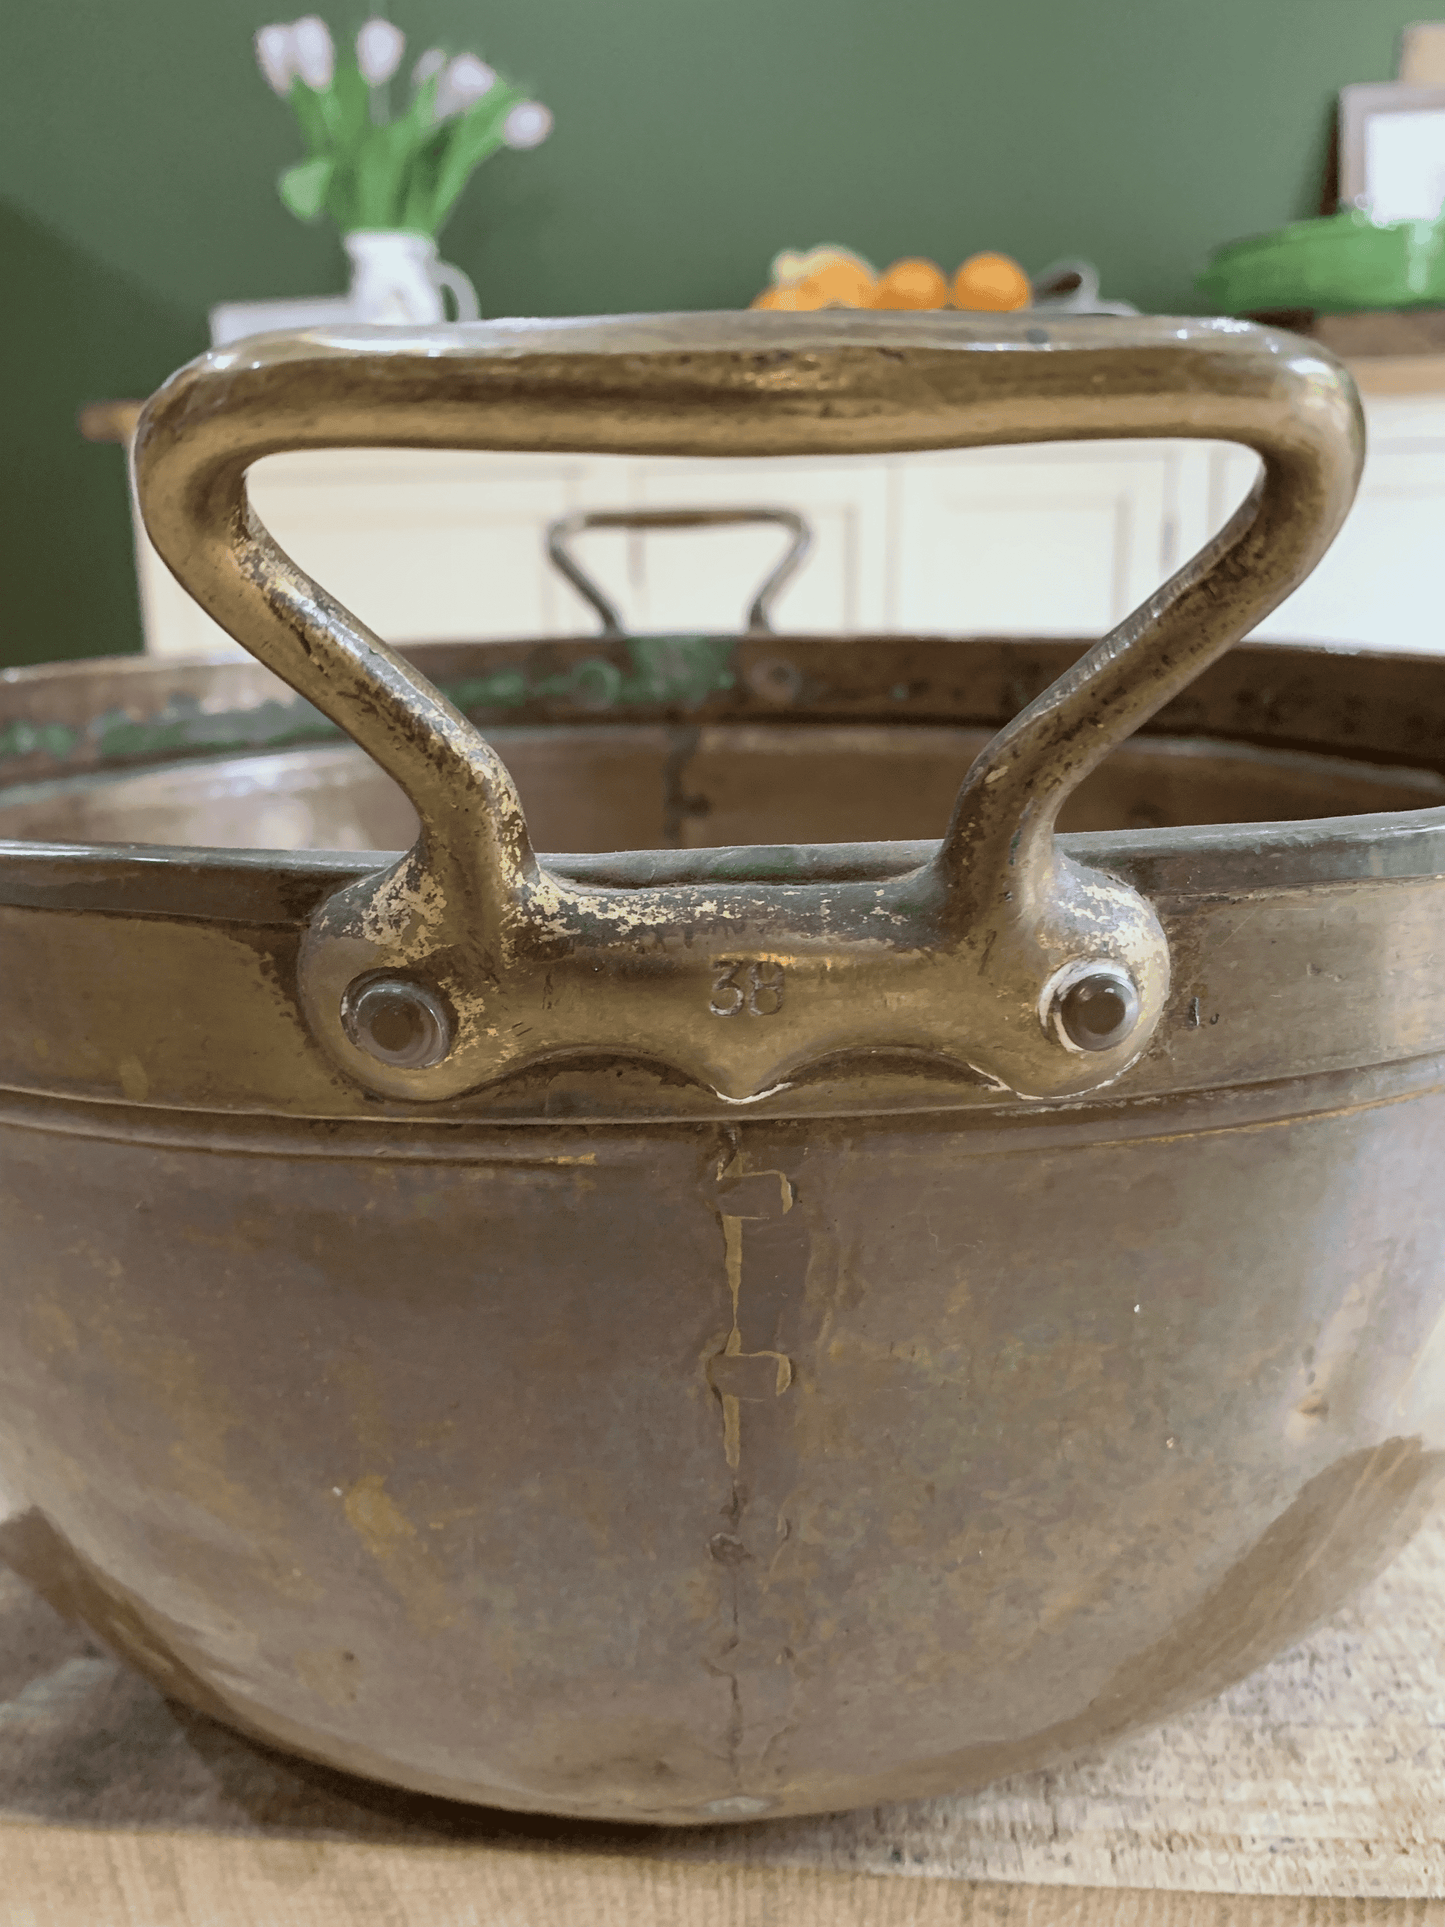 Exquisite Artistry: Antique Copper and Brass Pot for Your Home